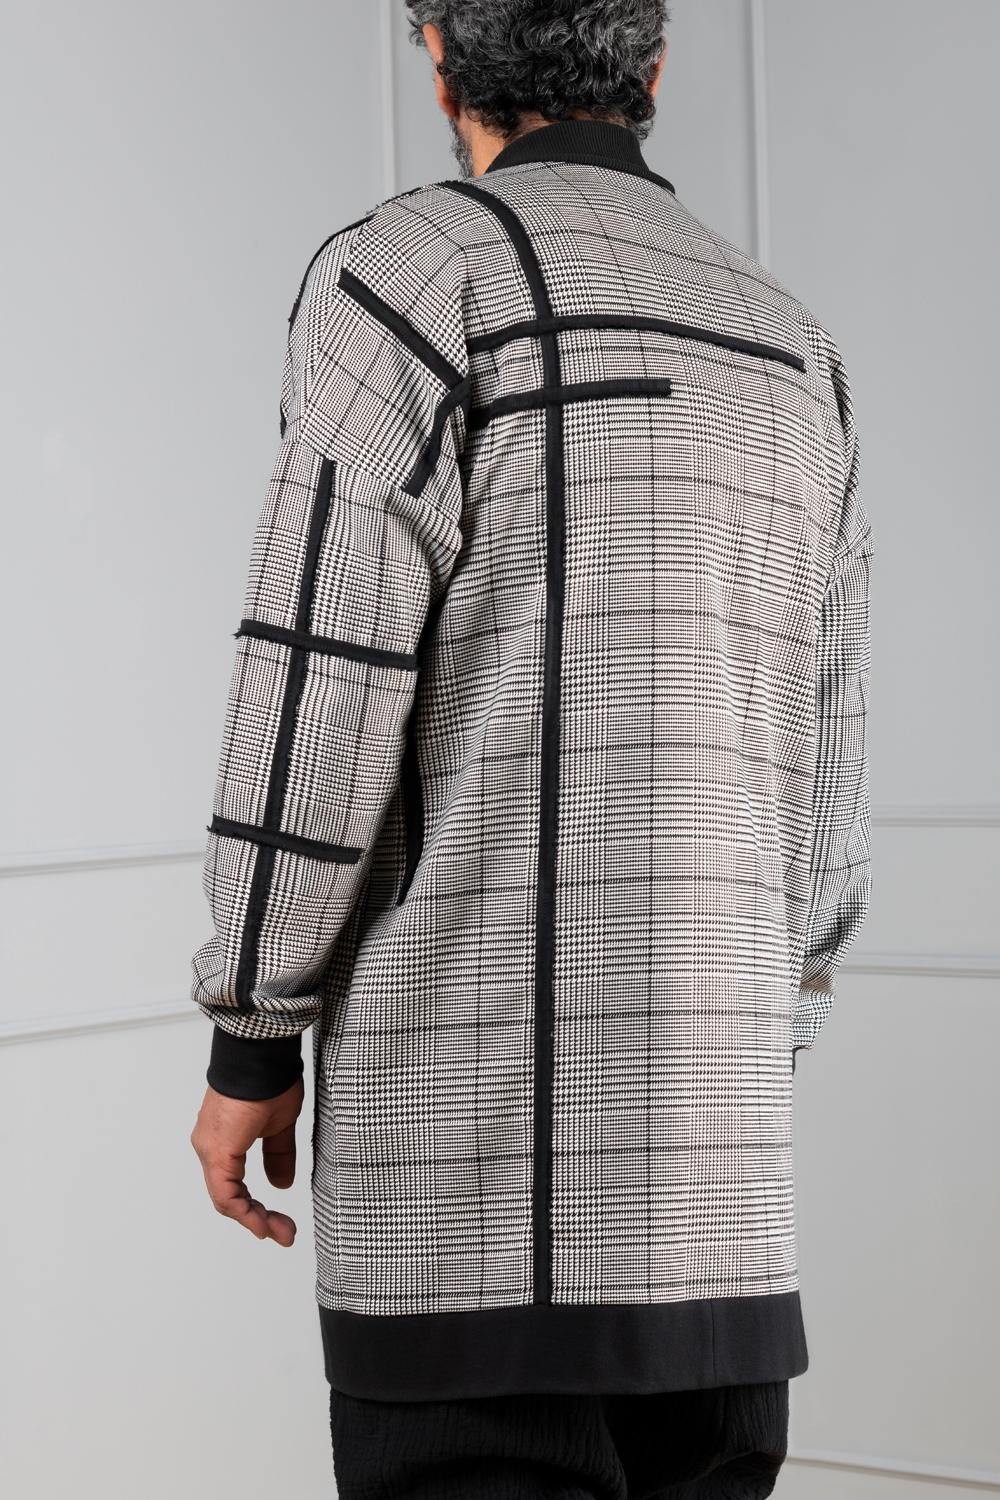 Houndstooth cardigan for men with a kimono shape | Haruco-vert